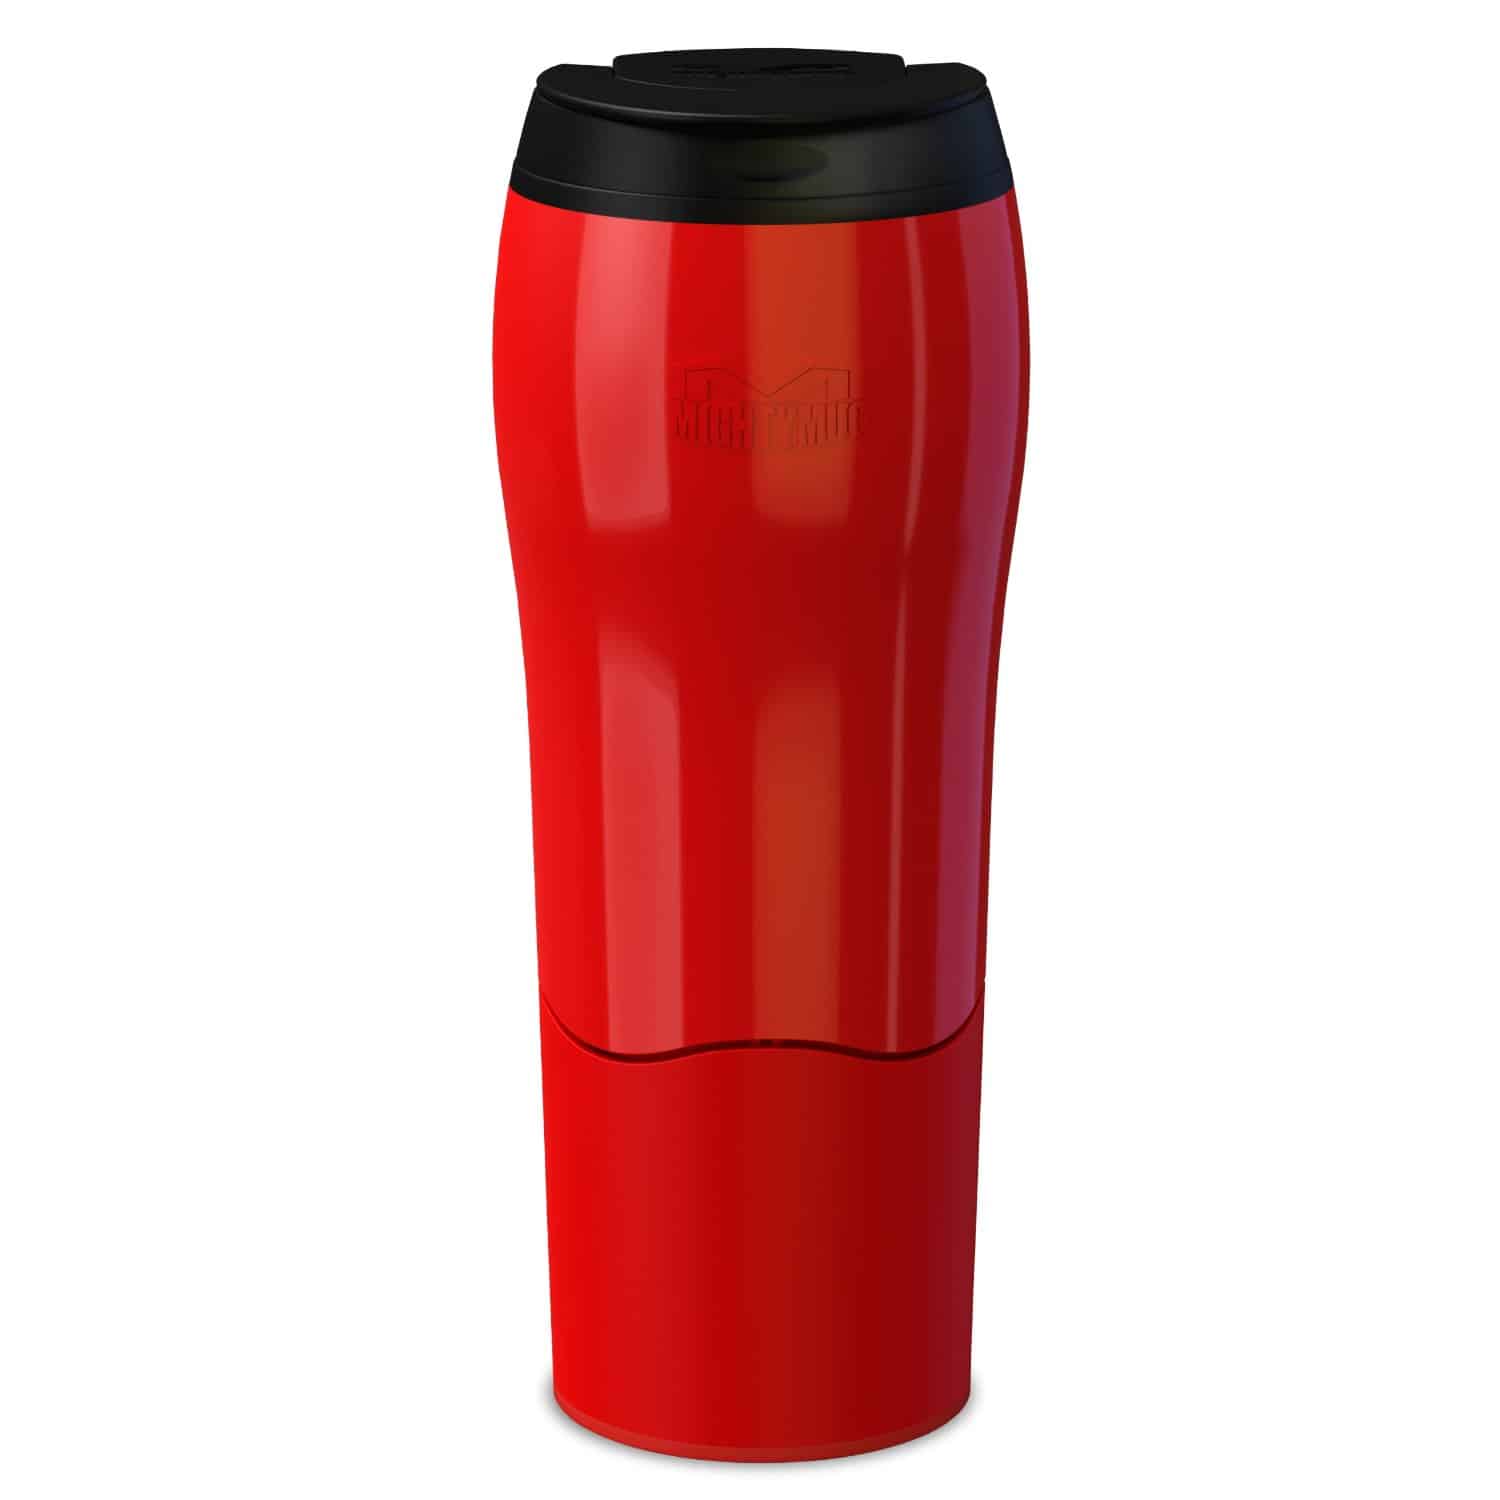 Dexam Mighty Mug Red Stable Cup